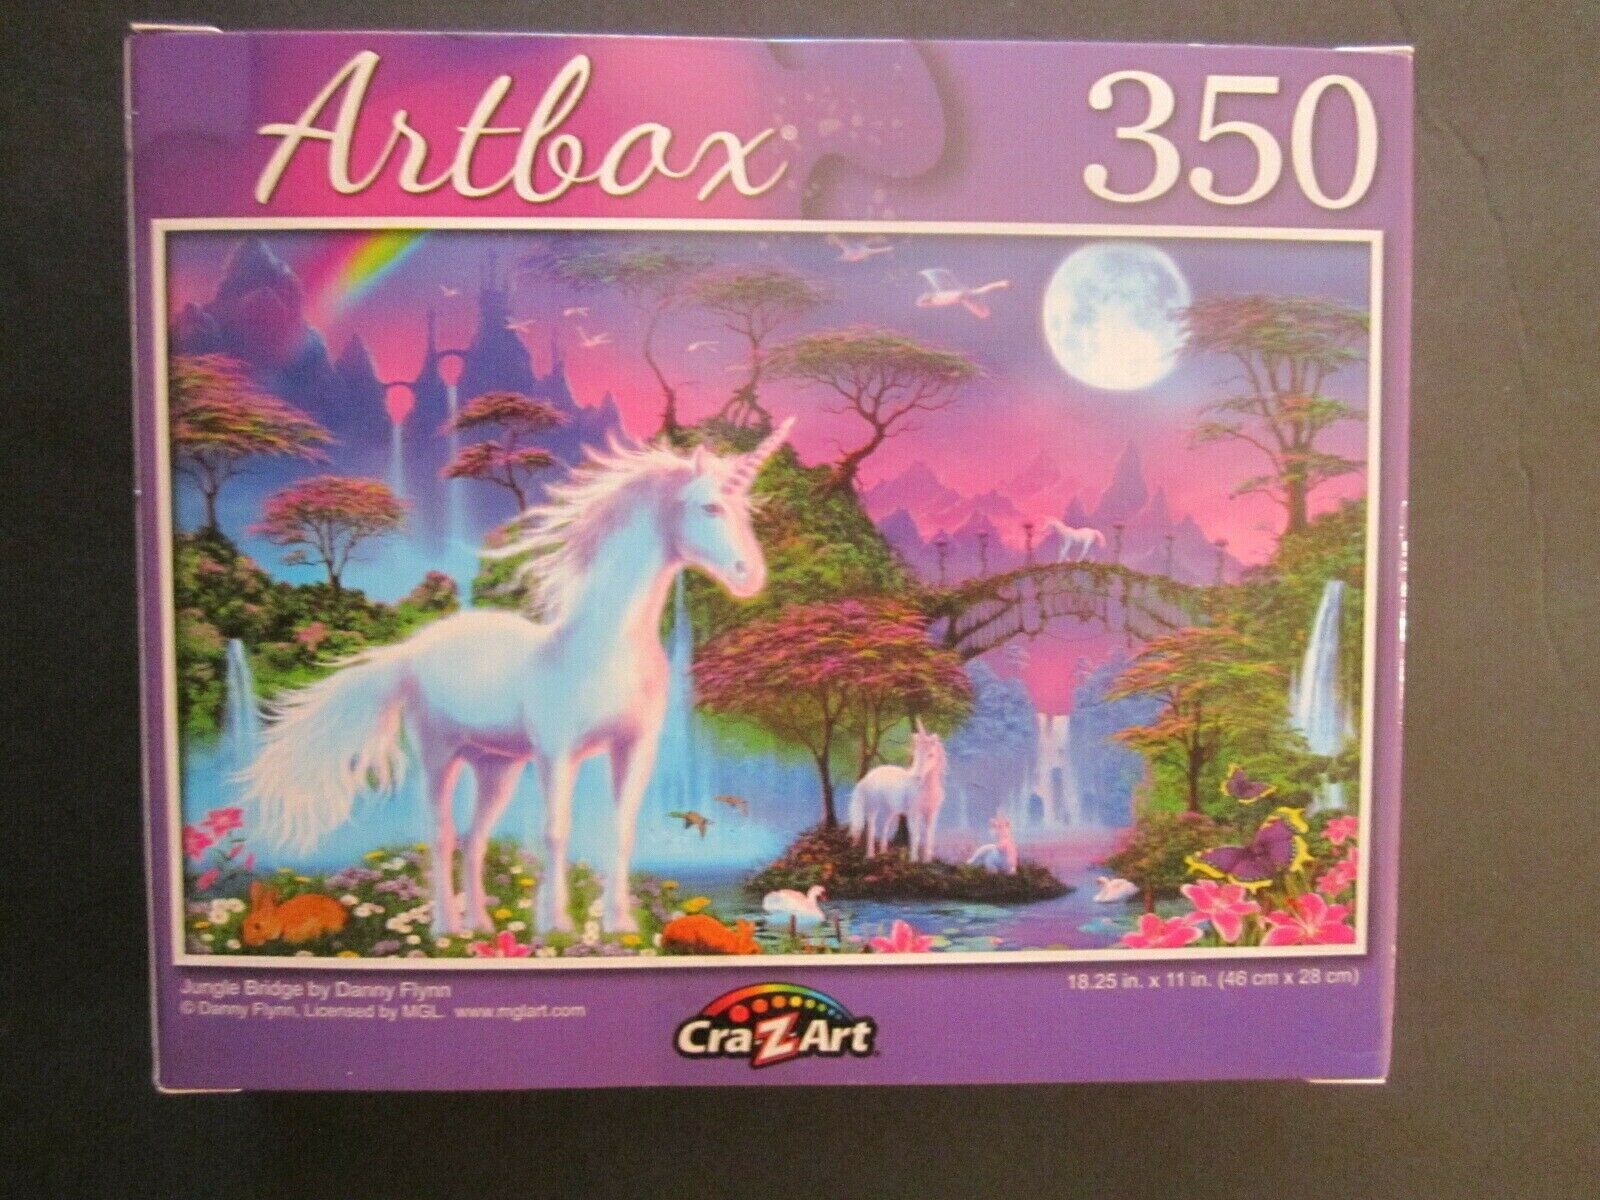 Primary image for Artbox 18" x 11"  Puzzle 350 Pcs "Jungle Bridge By Danny Flynn" Age 9+ New!